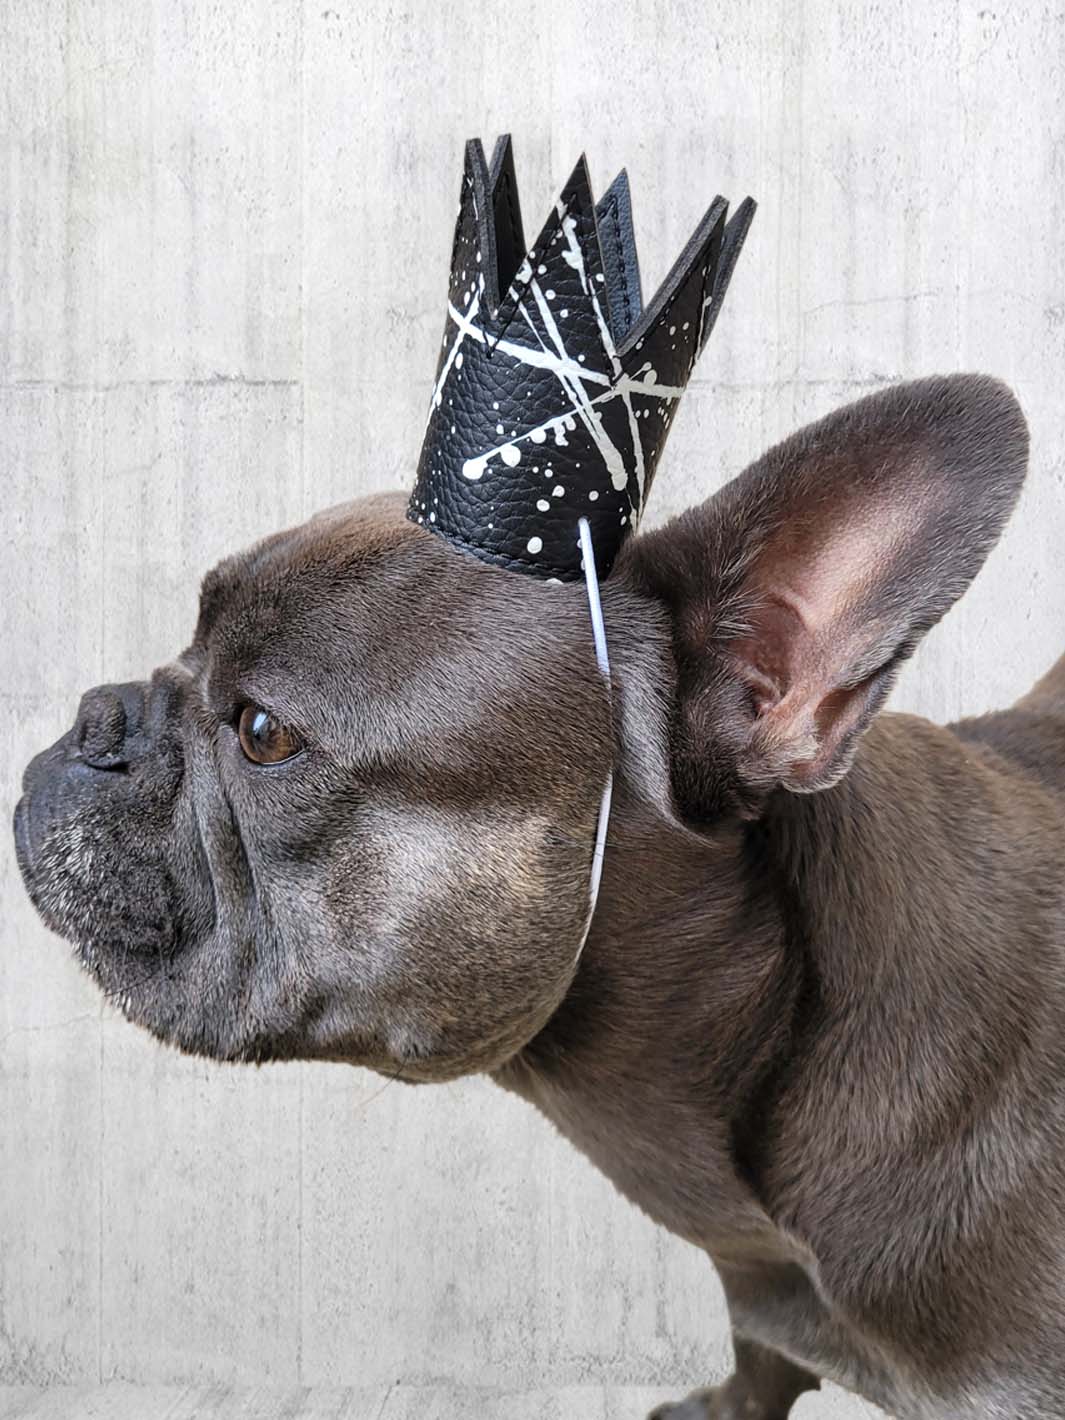 Cute frenchie wearing a fun patterned party crown by MAGNUS Canis.